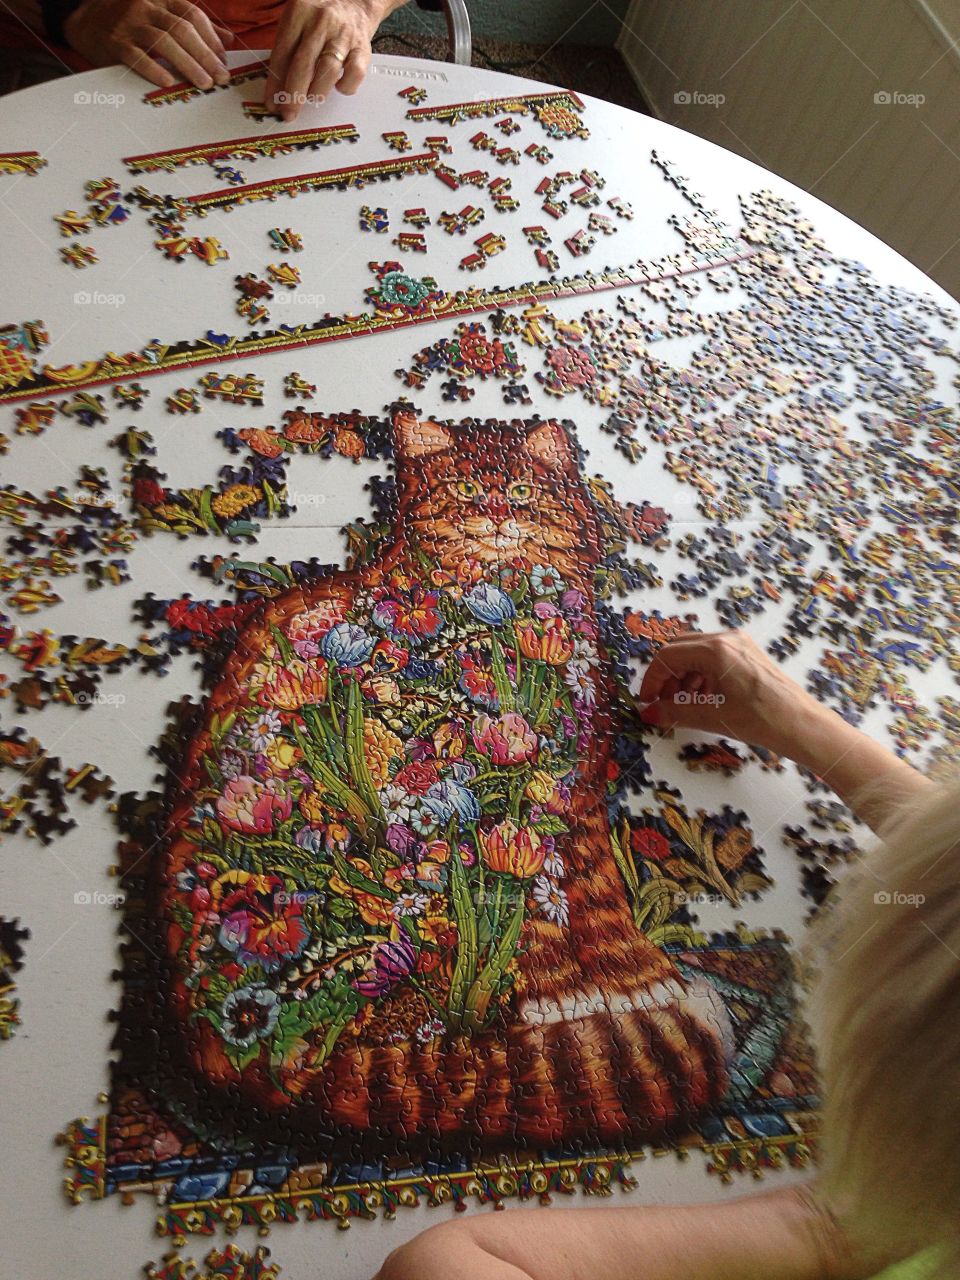 Peoples playing puzzle on table